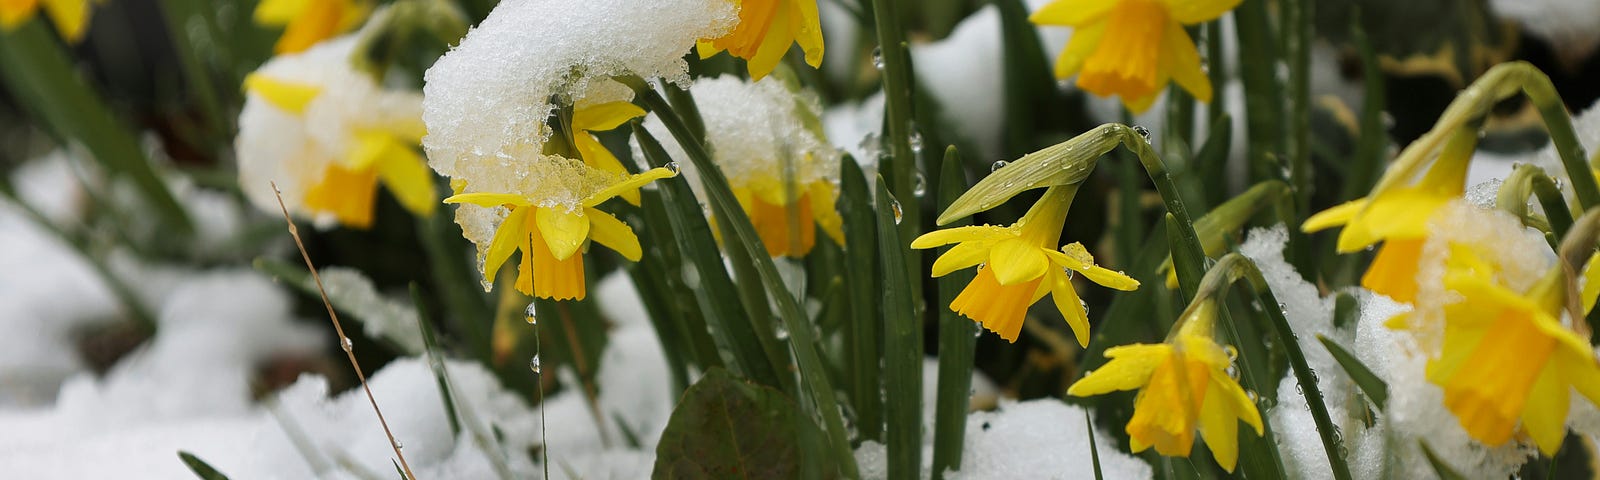 Group of small yellow daffodils in the melting spring snow